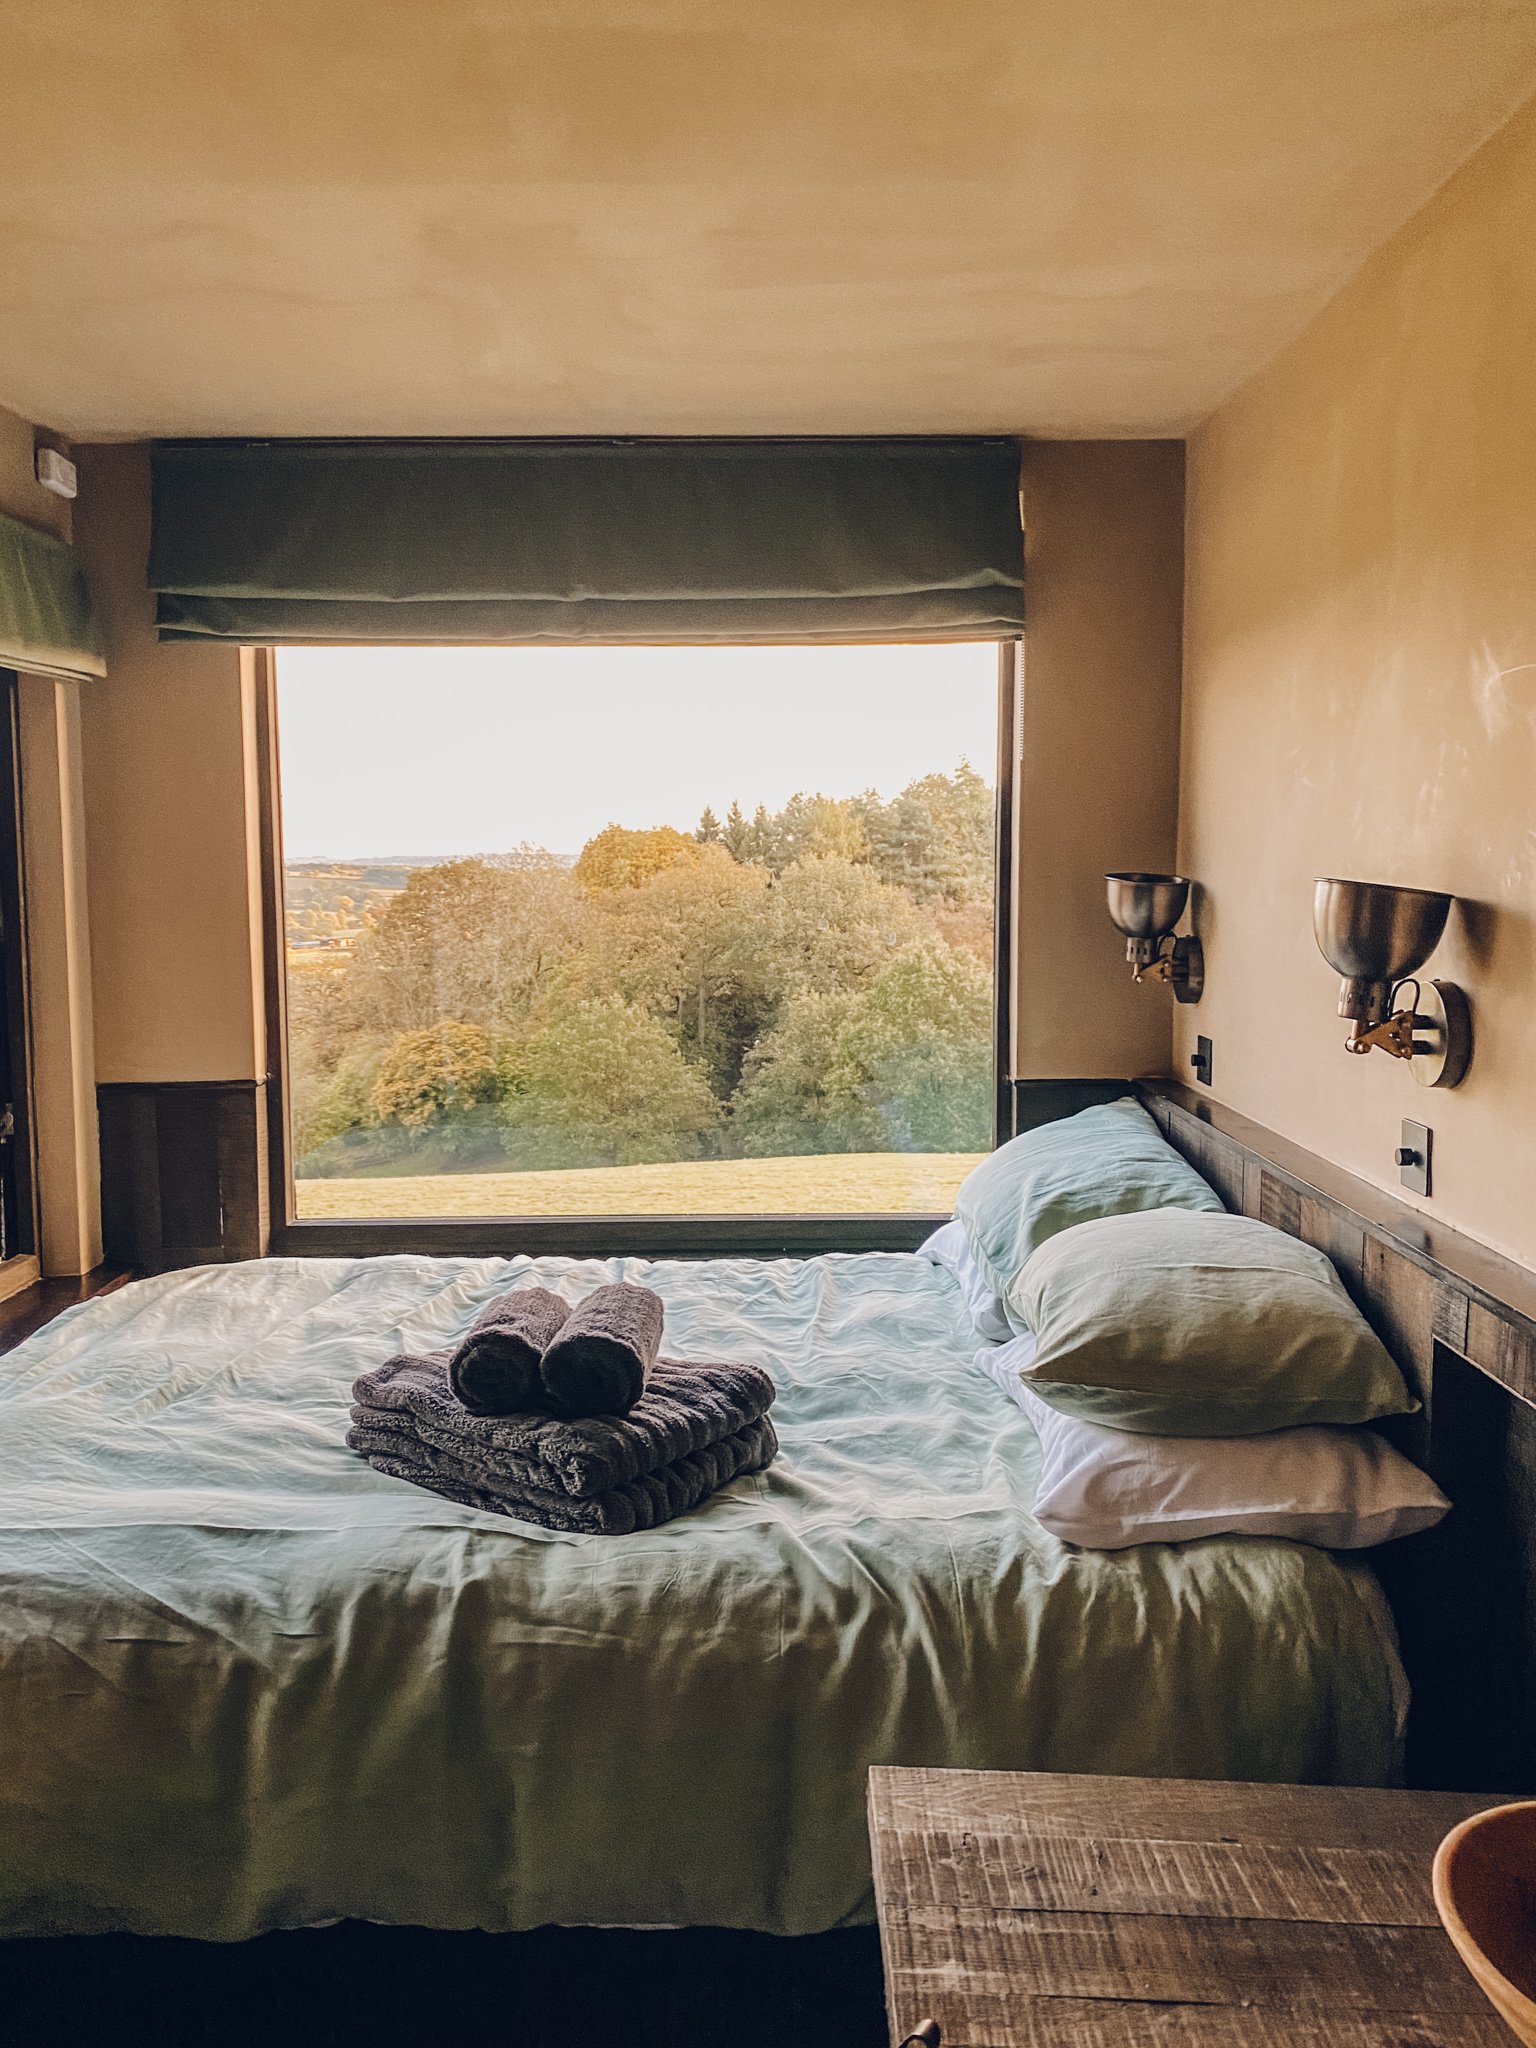 A cabin stay at Rest + Wild, Shropshire